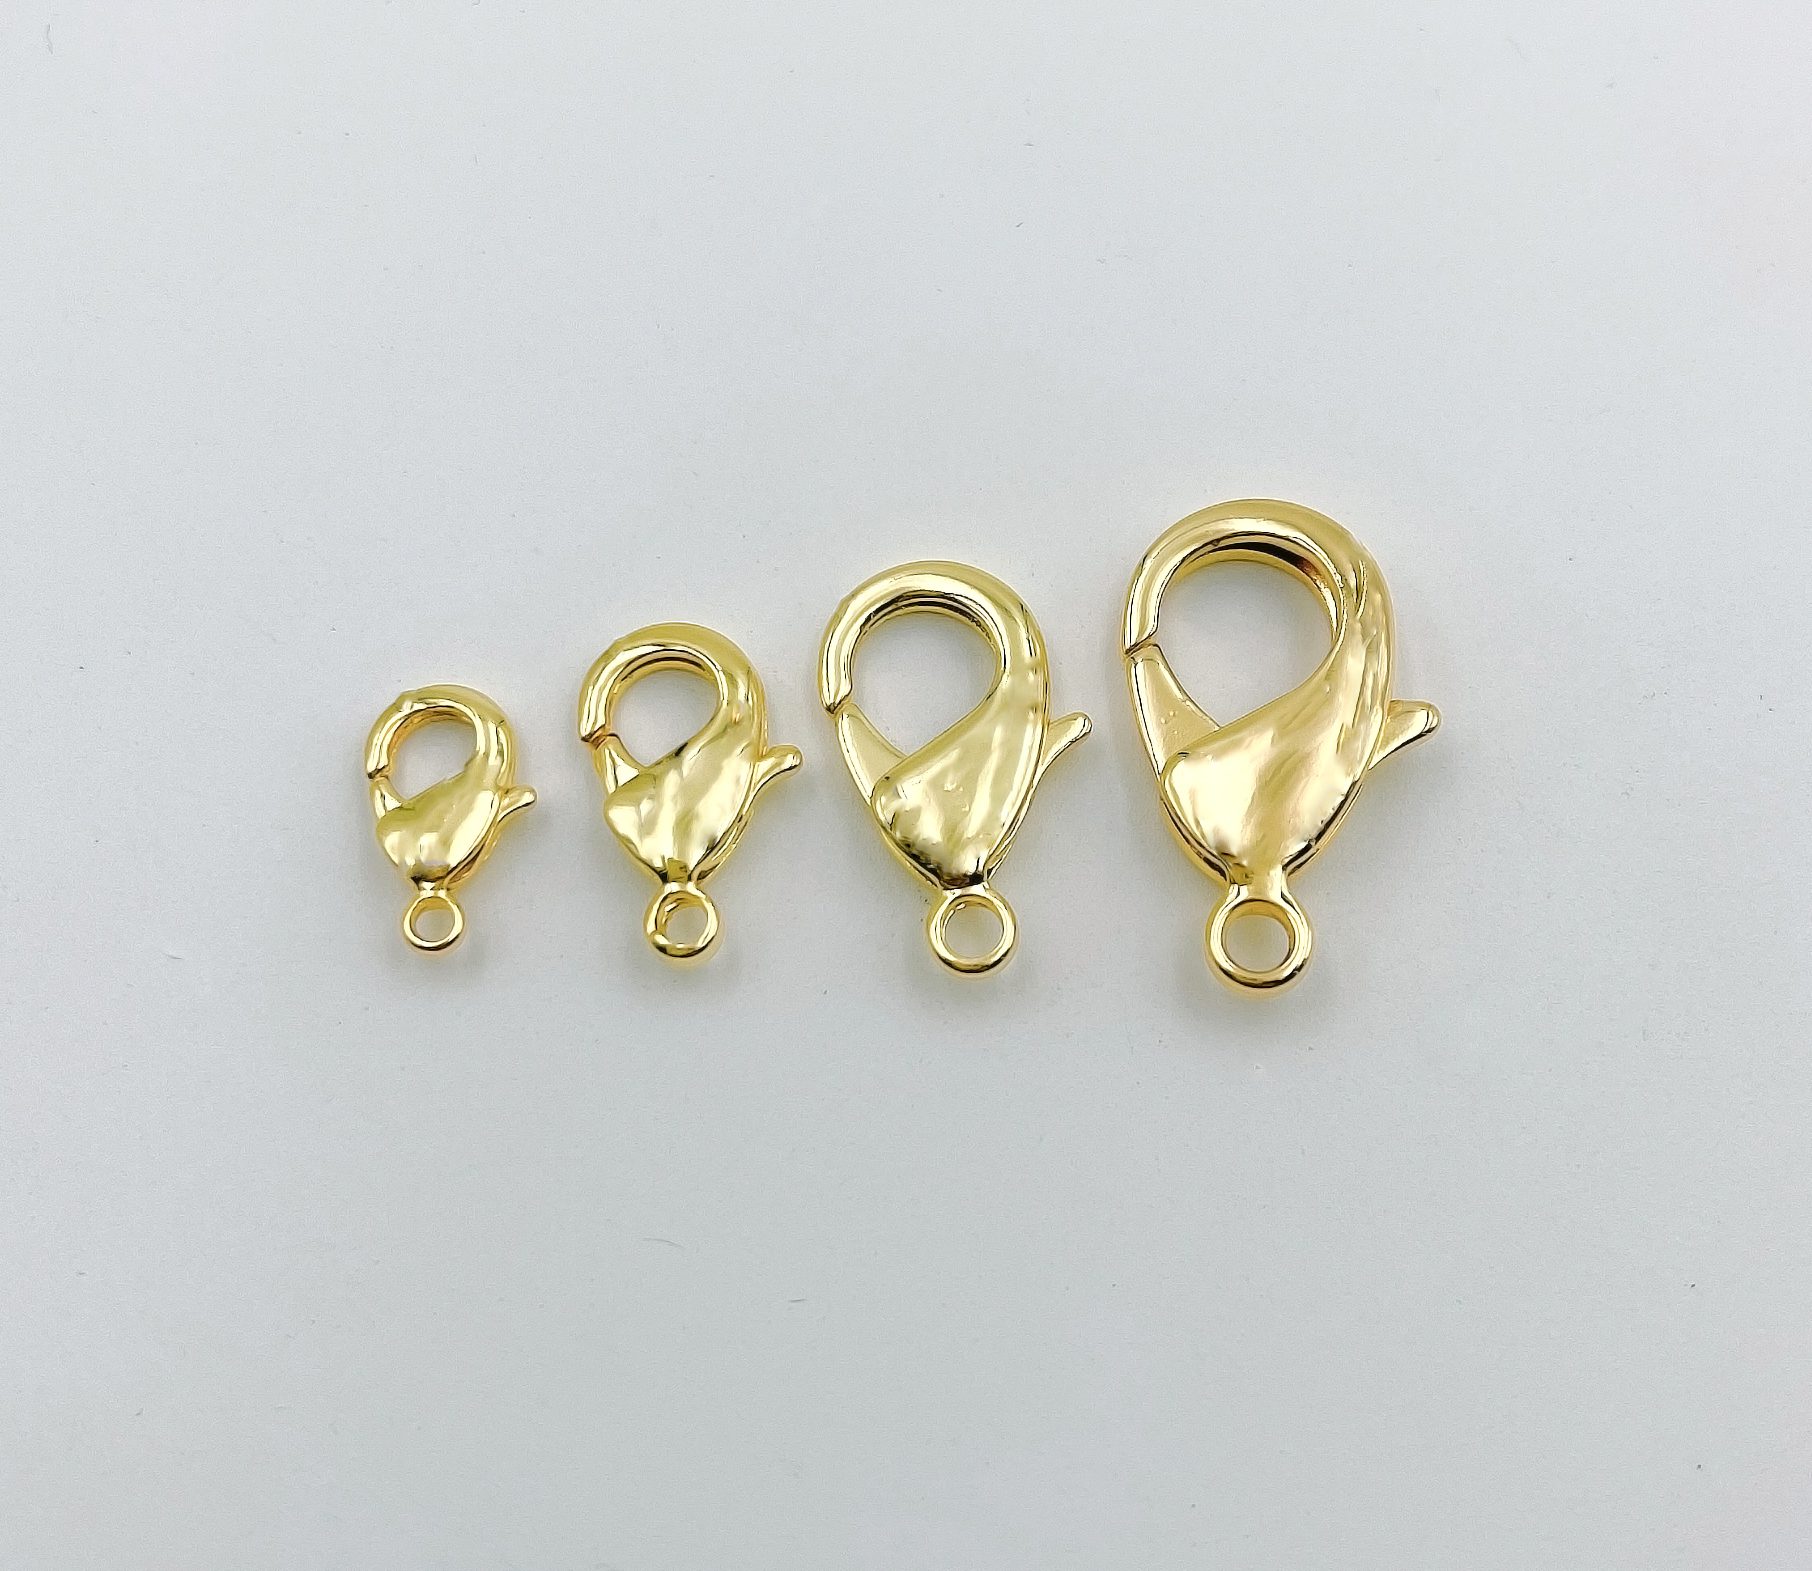 Yellow Gold 2 pcs 14k Gold Filled Straight Lobster Claw Clasp Bead Open Jump Ring 10mm Findings